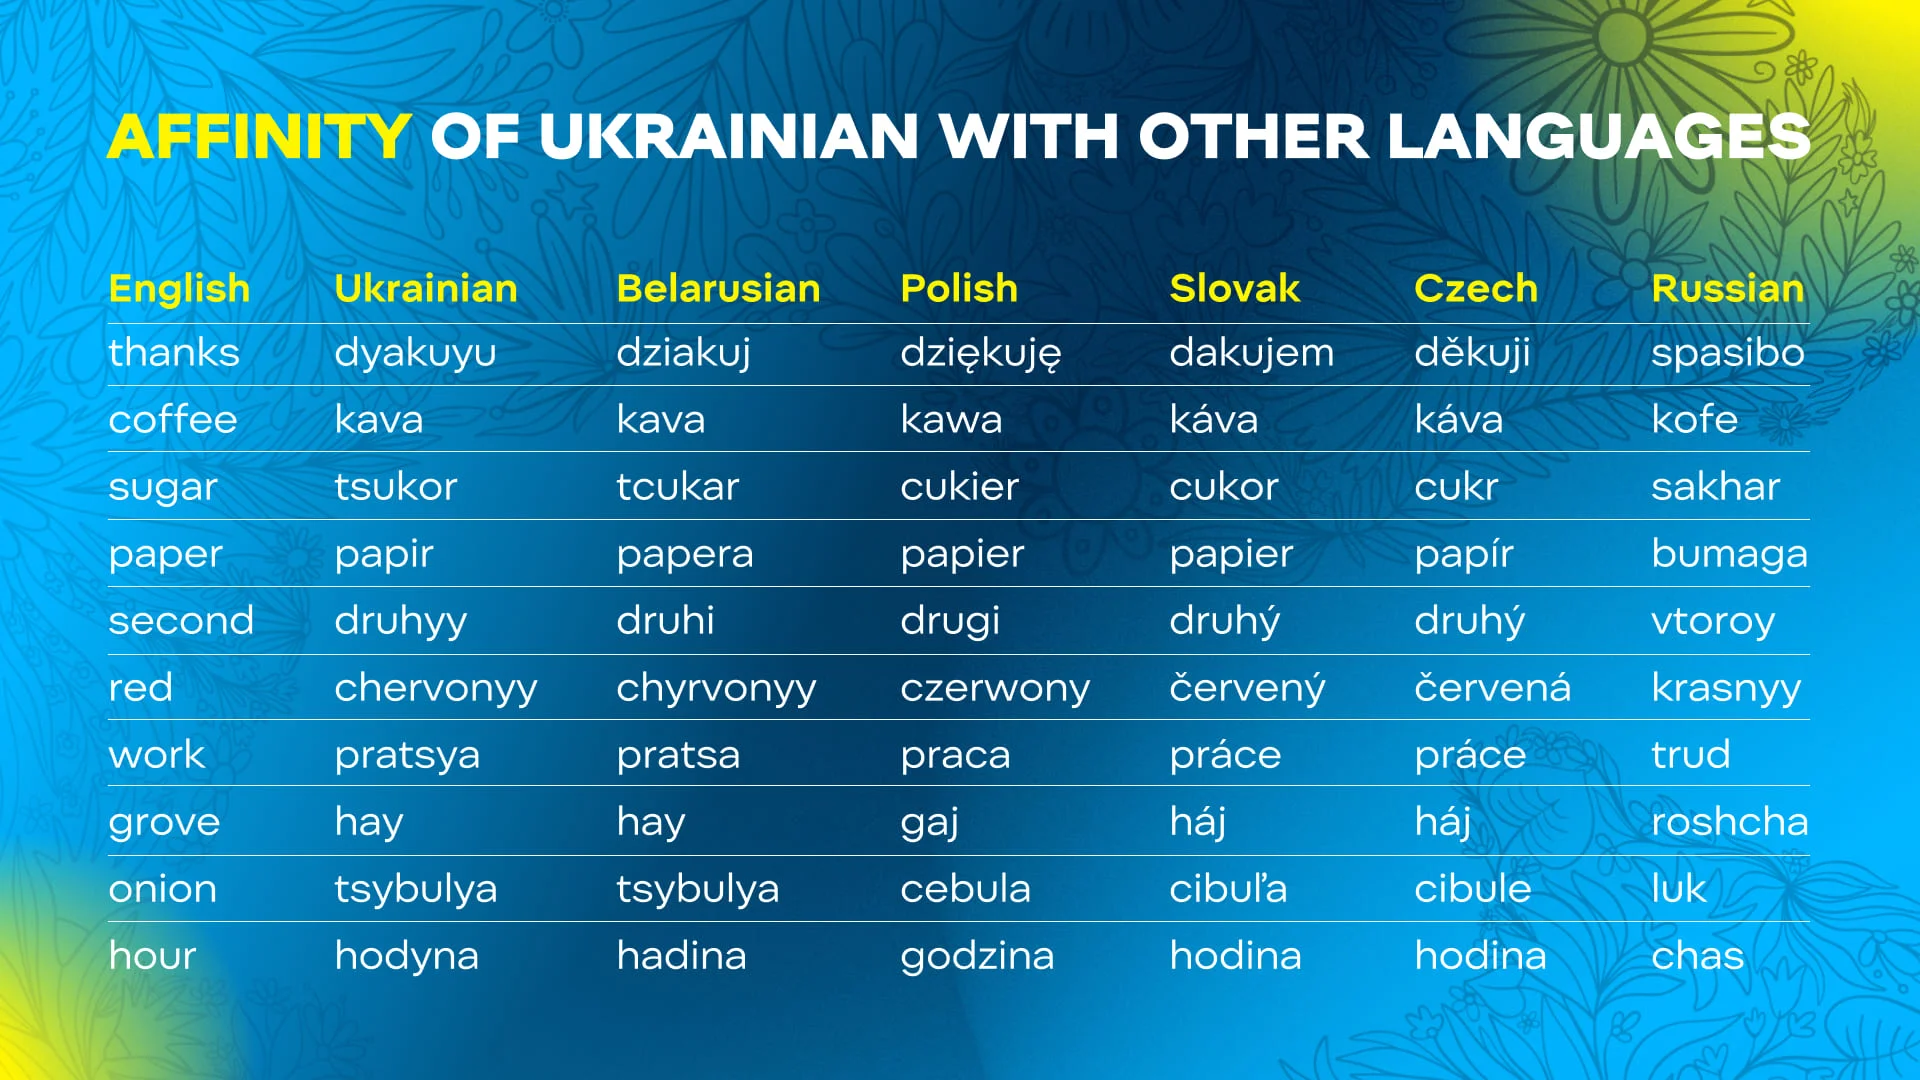 Affinity of Ukrainian with other languages. Credit: WePlay Holding